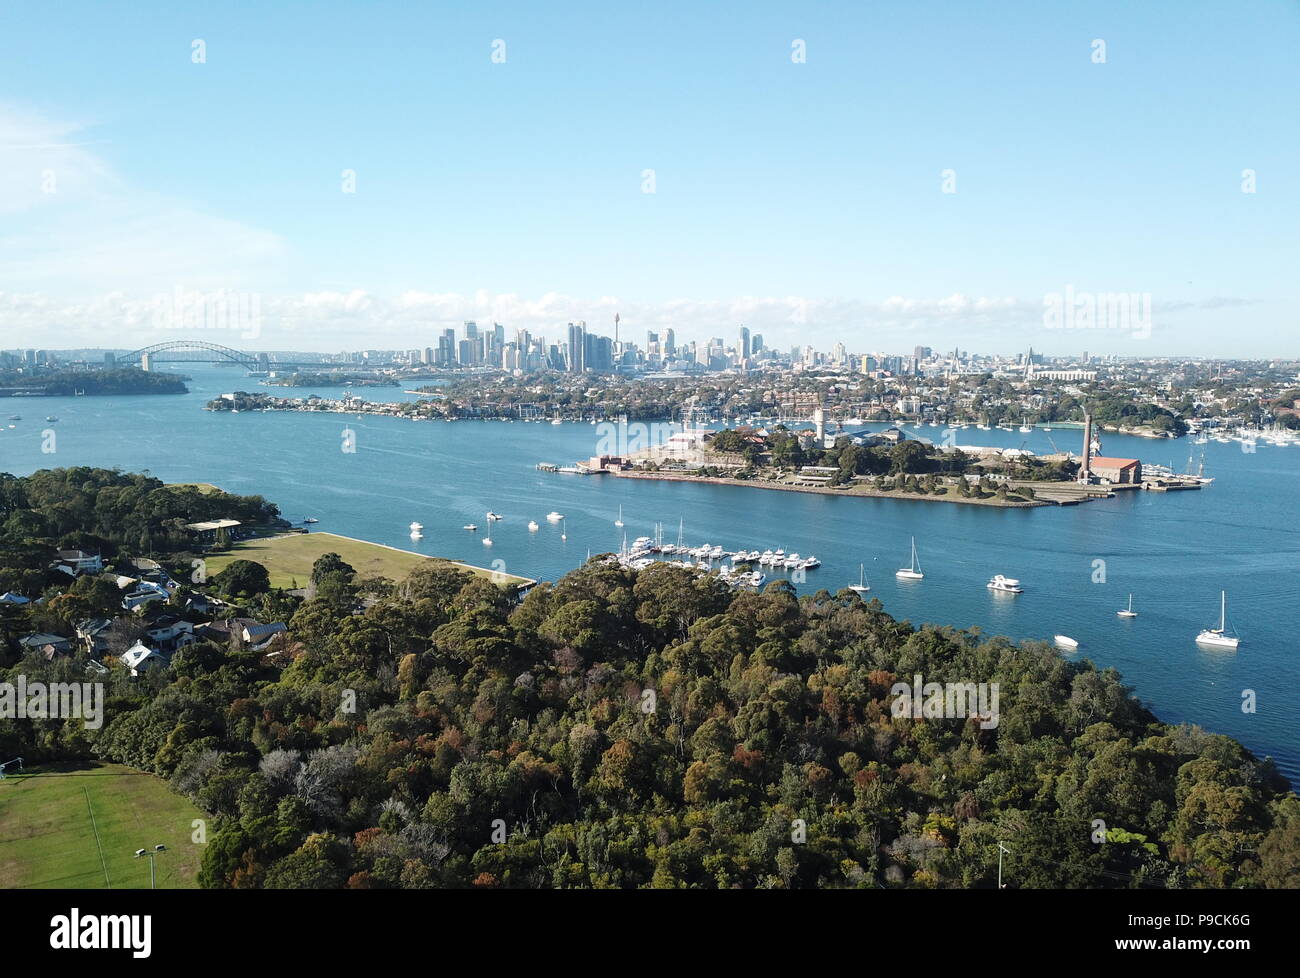 Aerial view of Cockatoo Island, Sydney CBD and Harbour Bridge with Sydney tower and financial district skyscrapers. Stock Photo